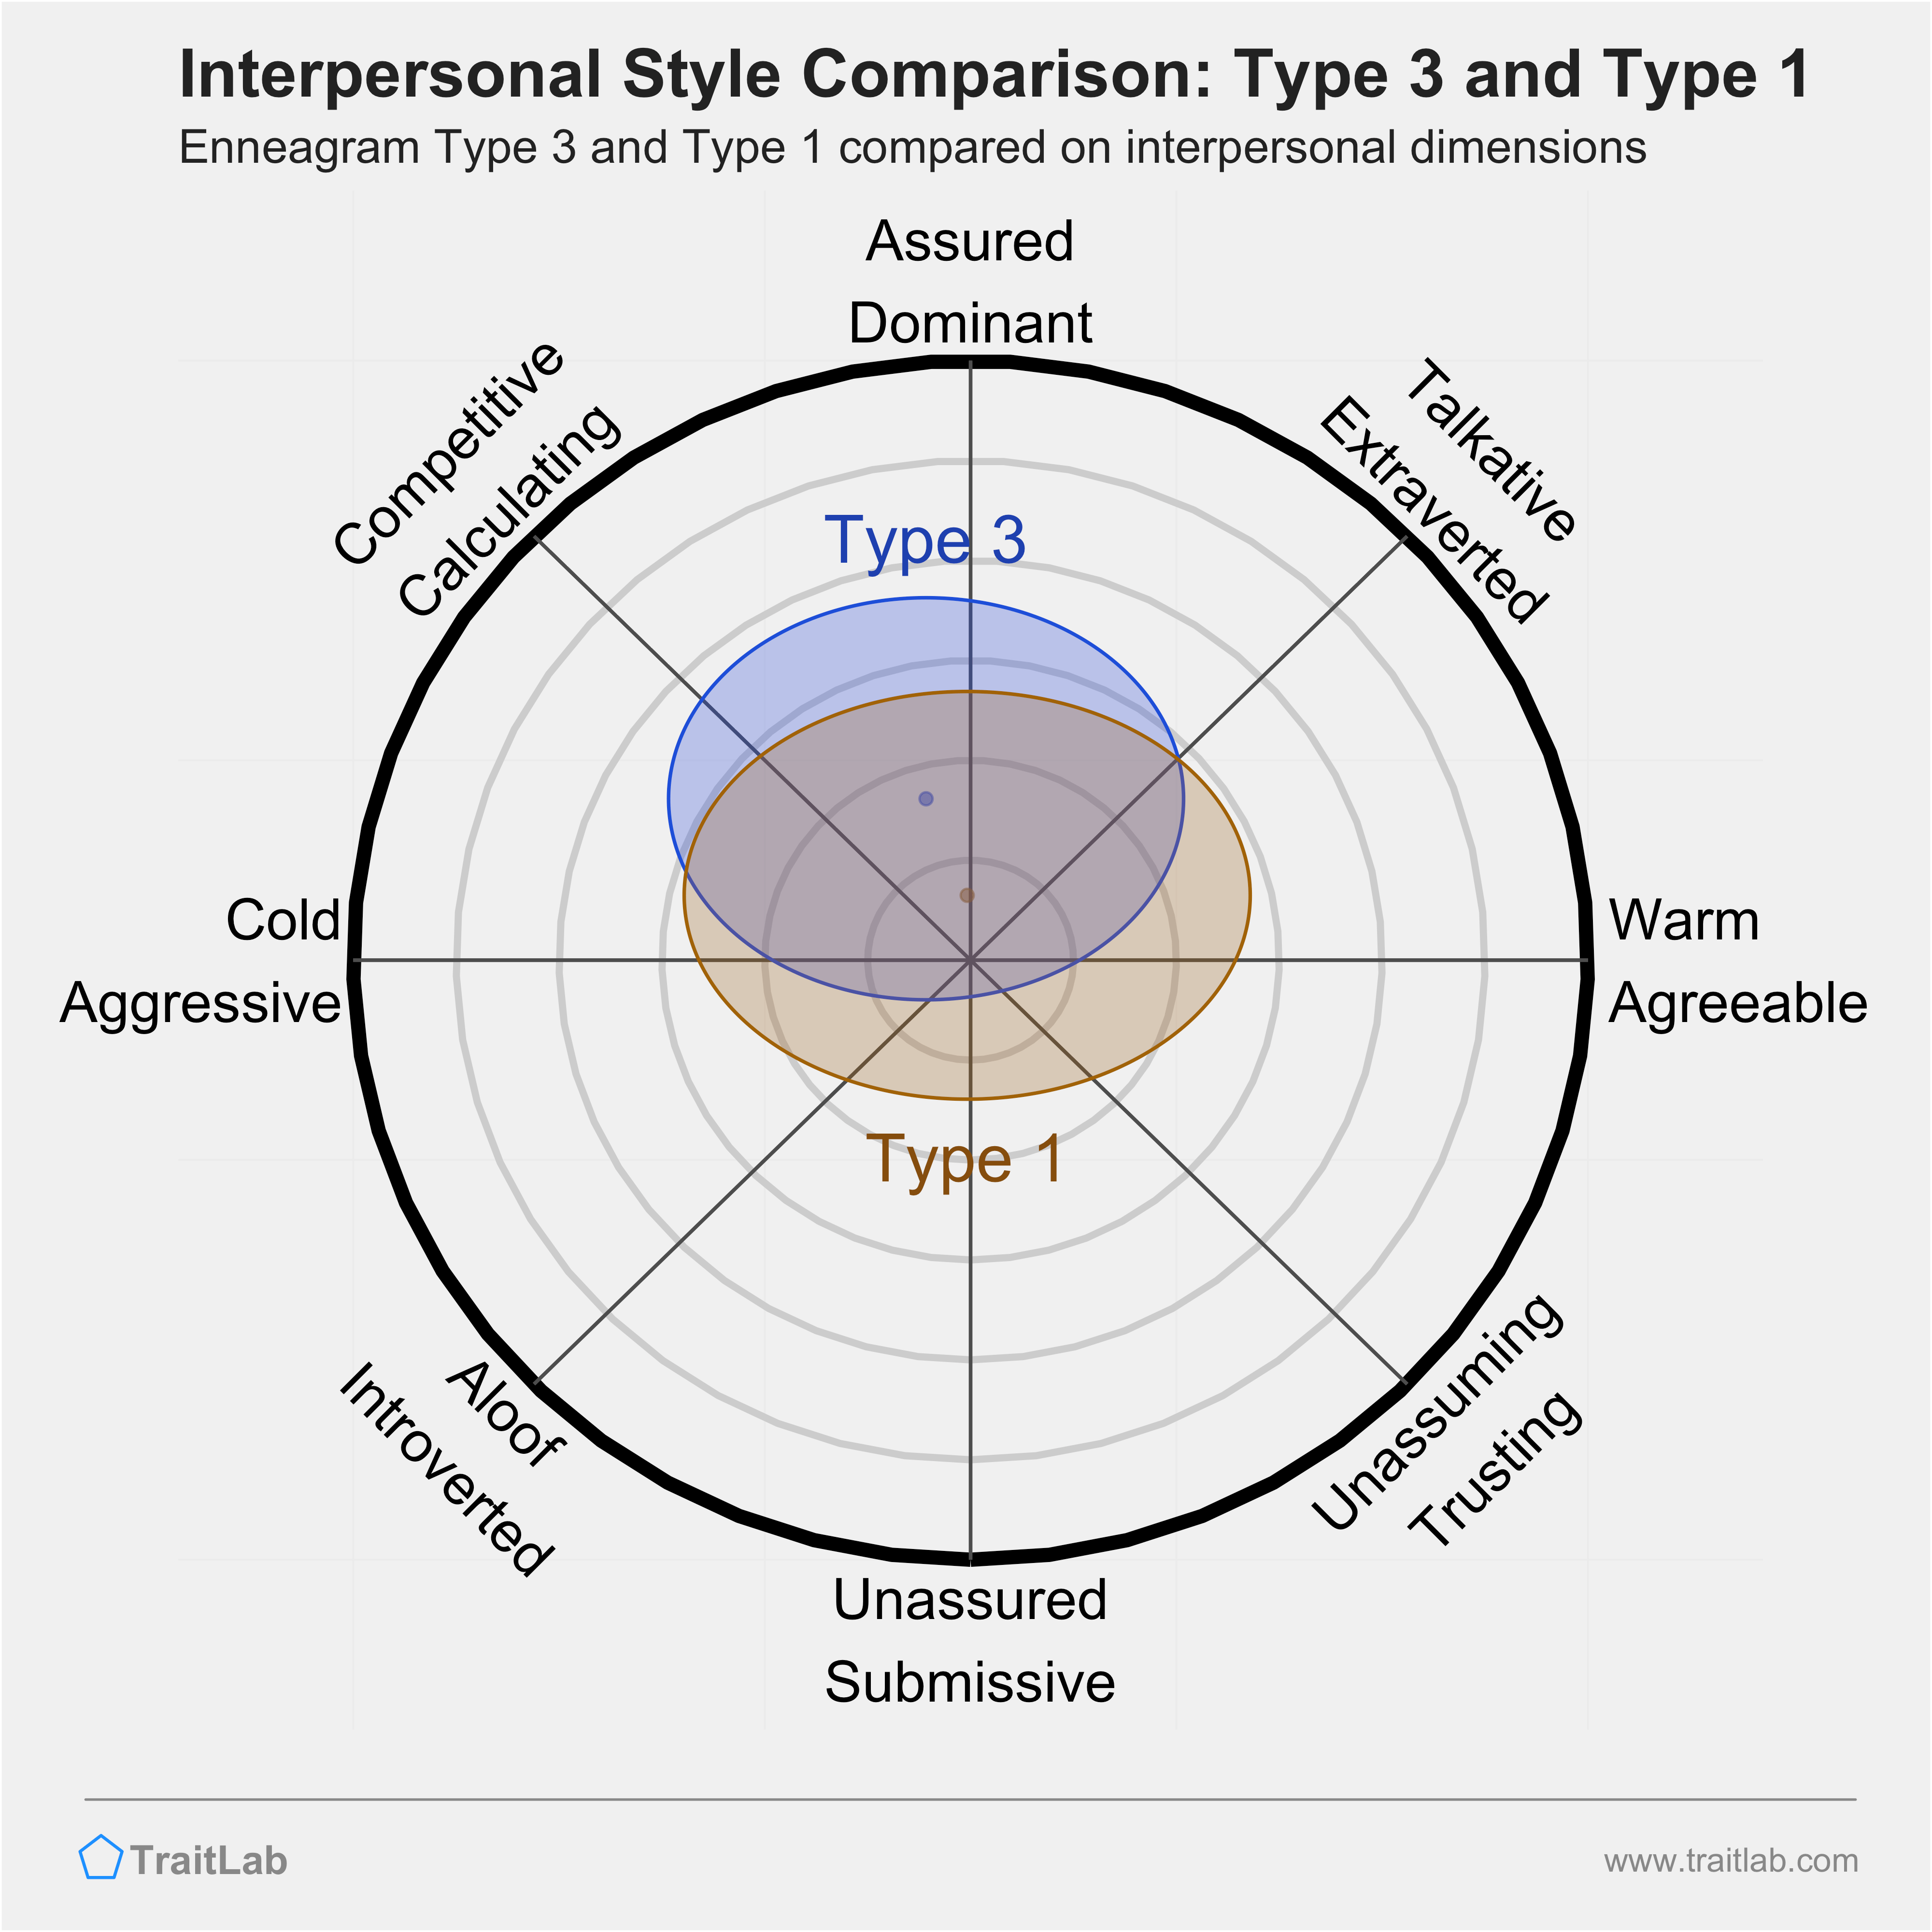 Enneagram Type 3 and Type 1 comparison across interpersonal dimensions